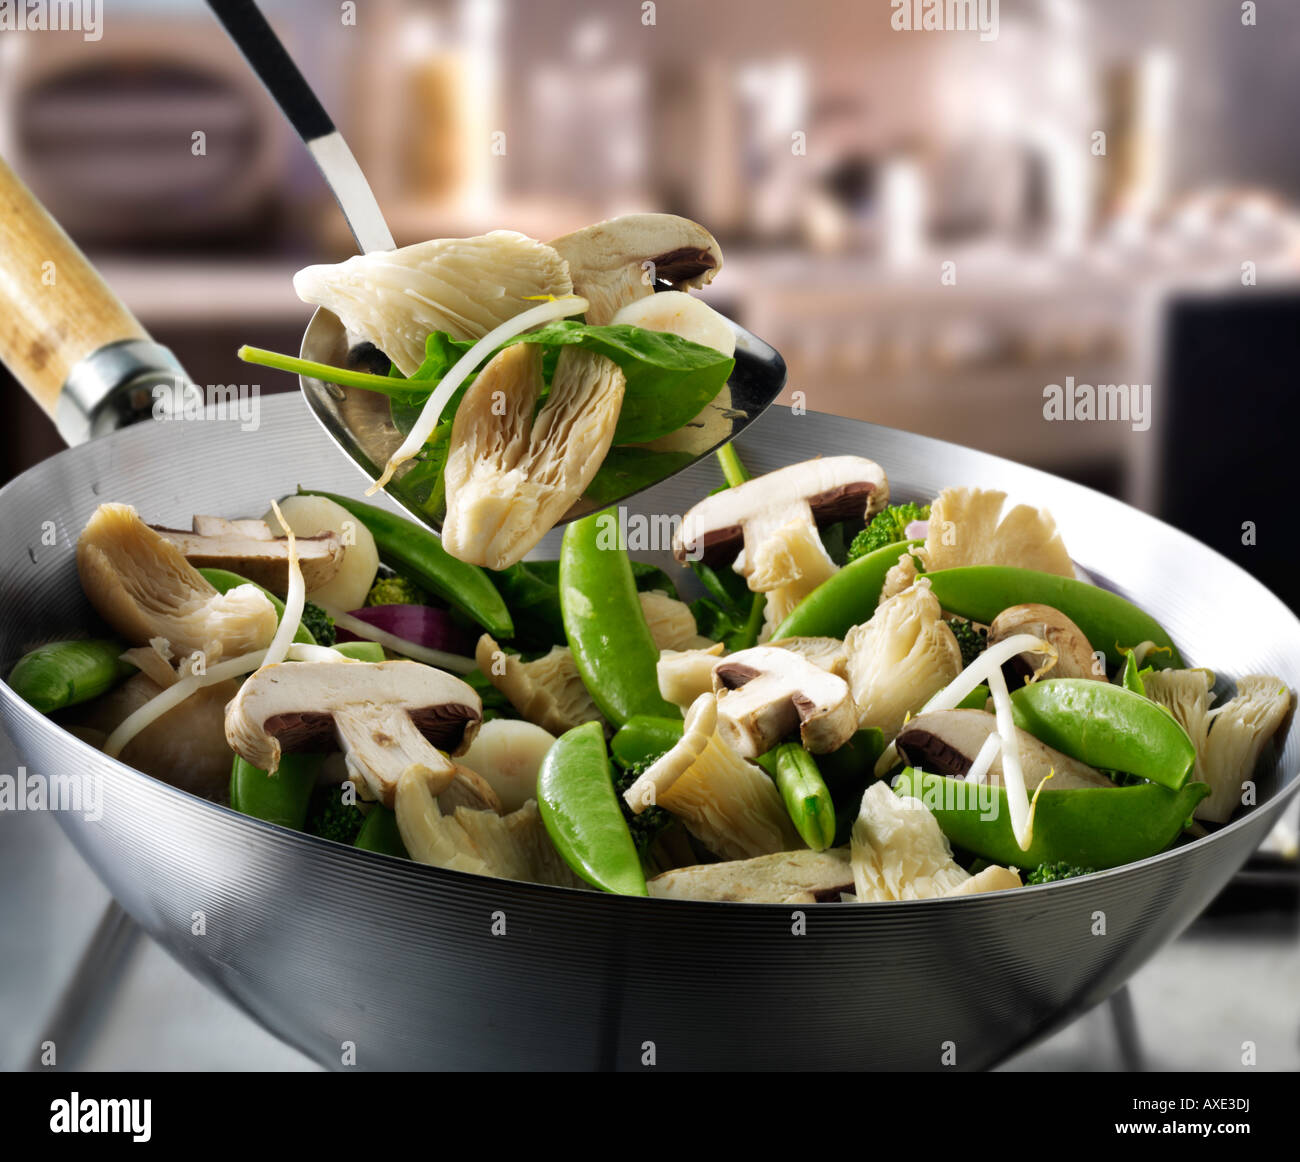 Vegetable stir fry in a wok being stirred with Shataki and oyster mushrooms, mange tout and vegetables Stock Photo